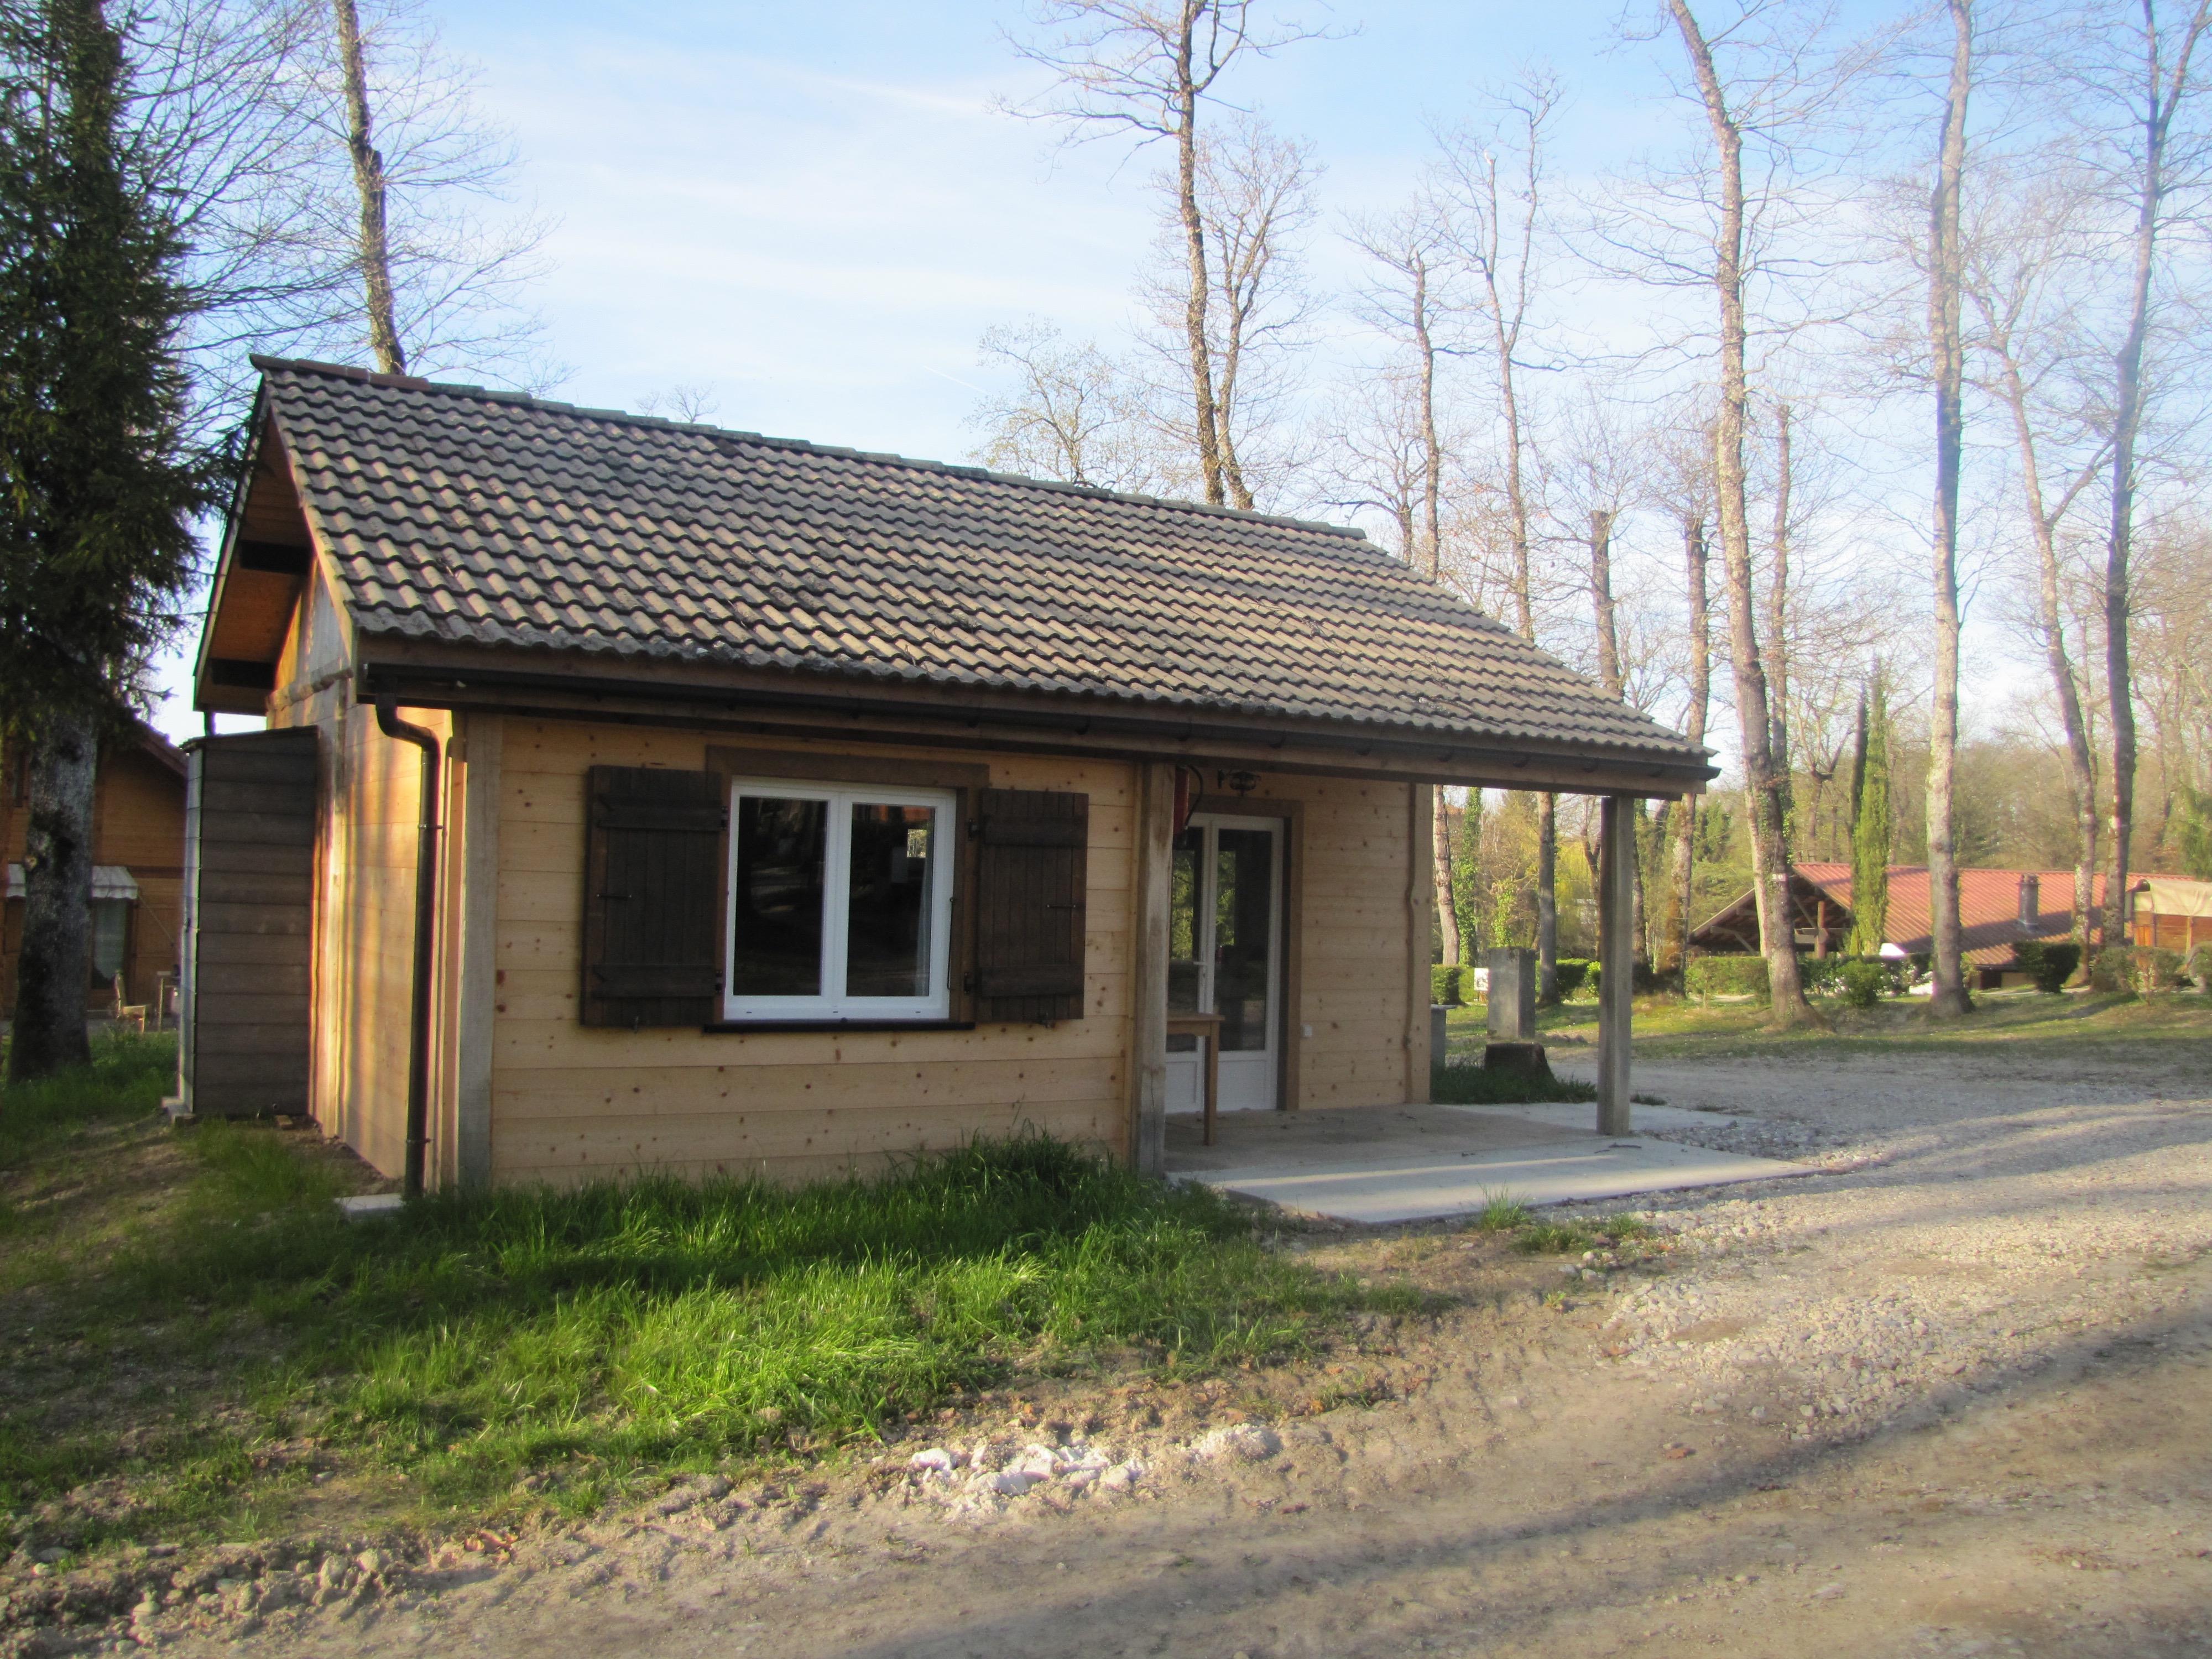 Accommodation - Chalet Adapted To The People With Reduced Mobility - Camping Relais du Léman